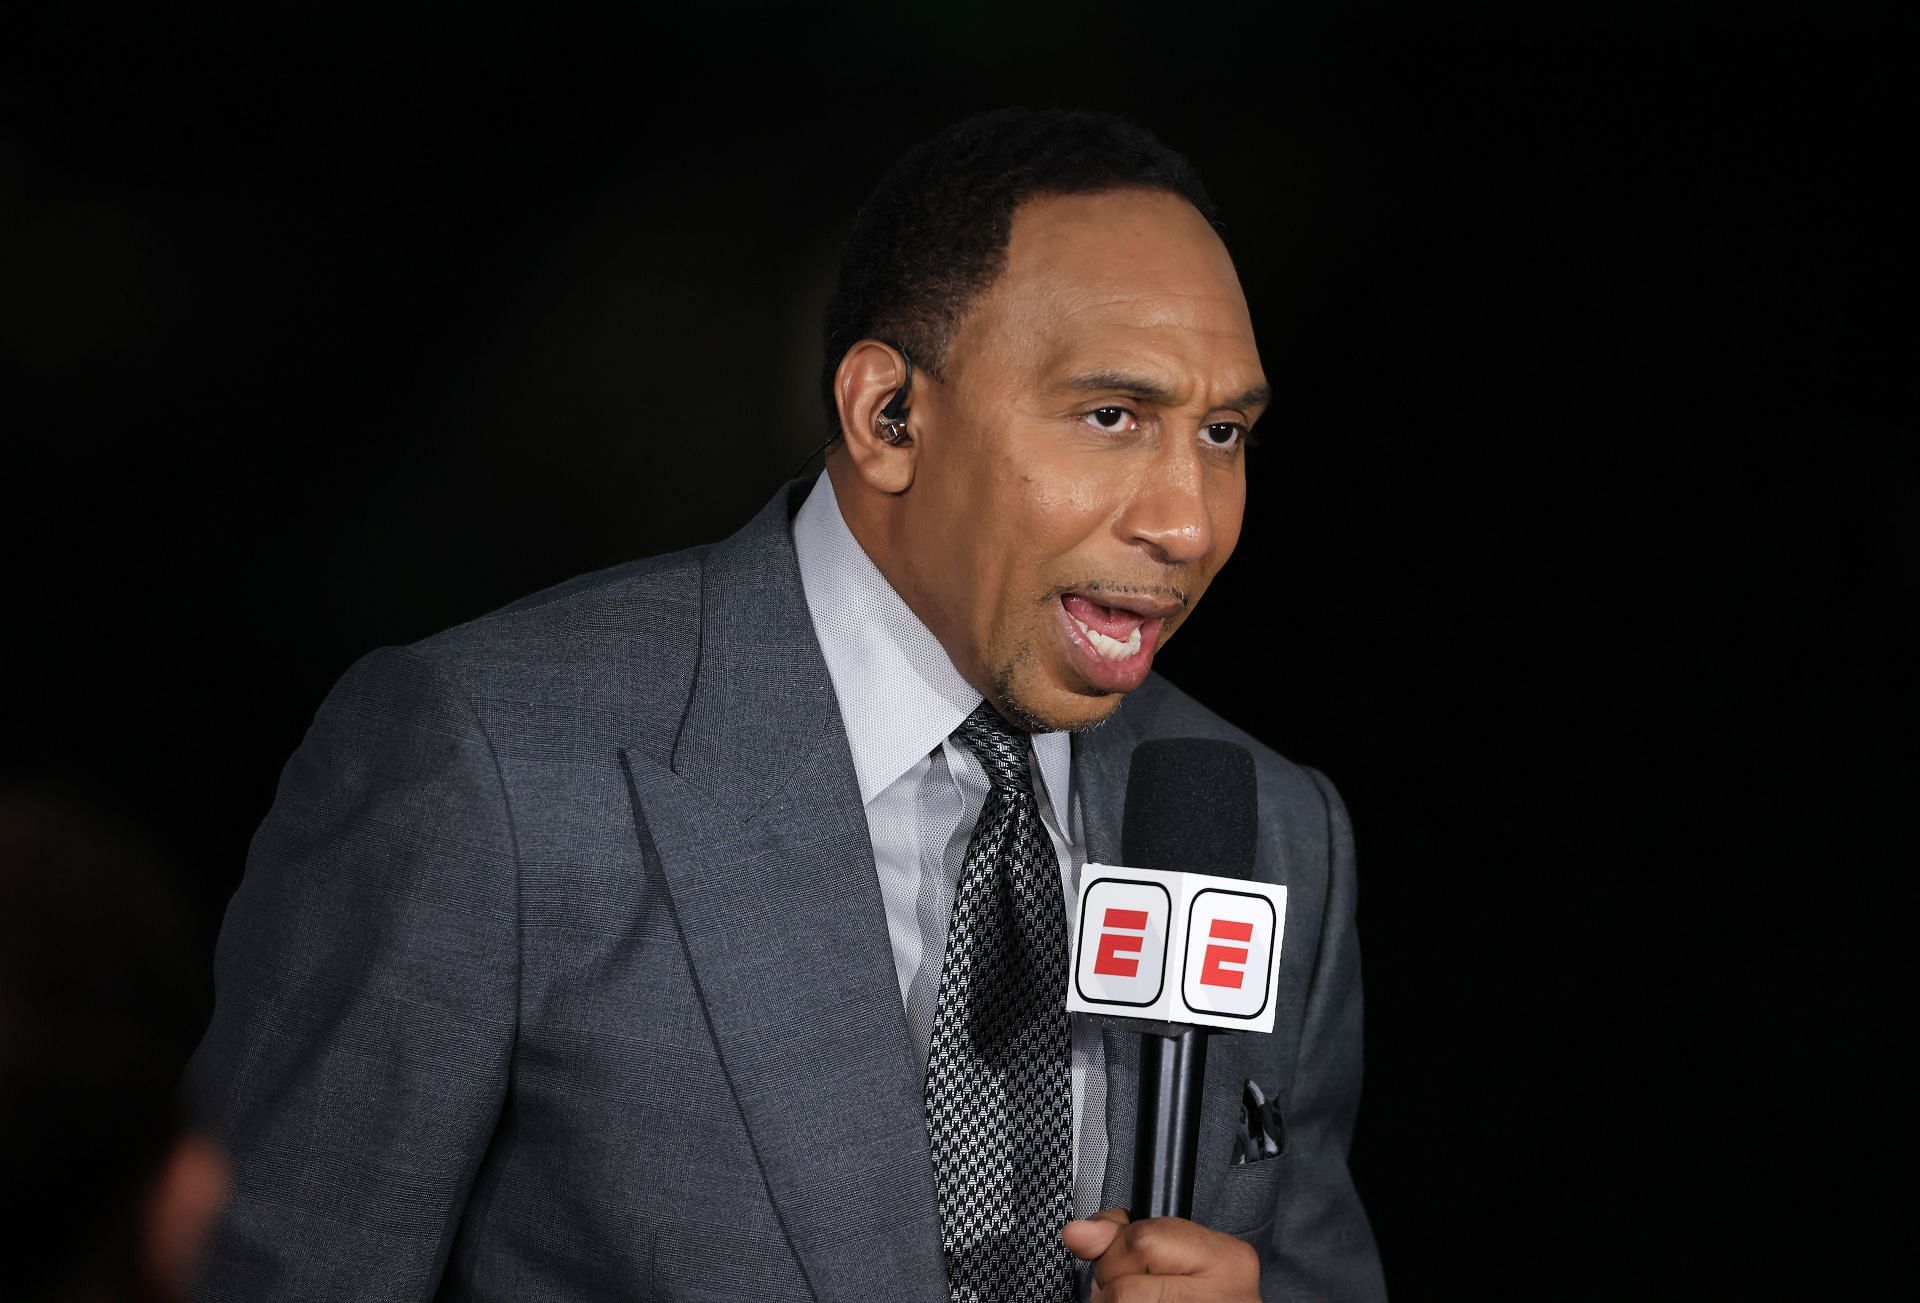 ESPN analyst Stephen A. Smith at the 2021 NBA Finals - Game Three